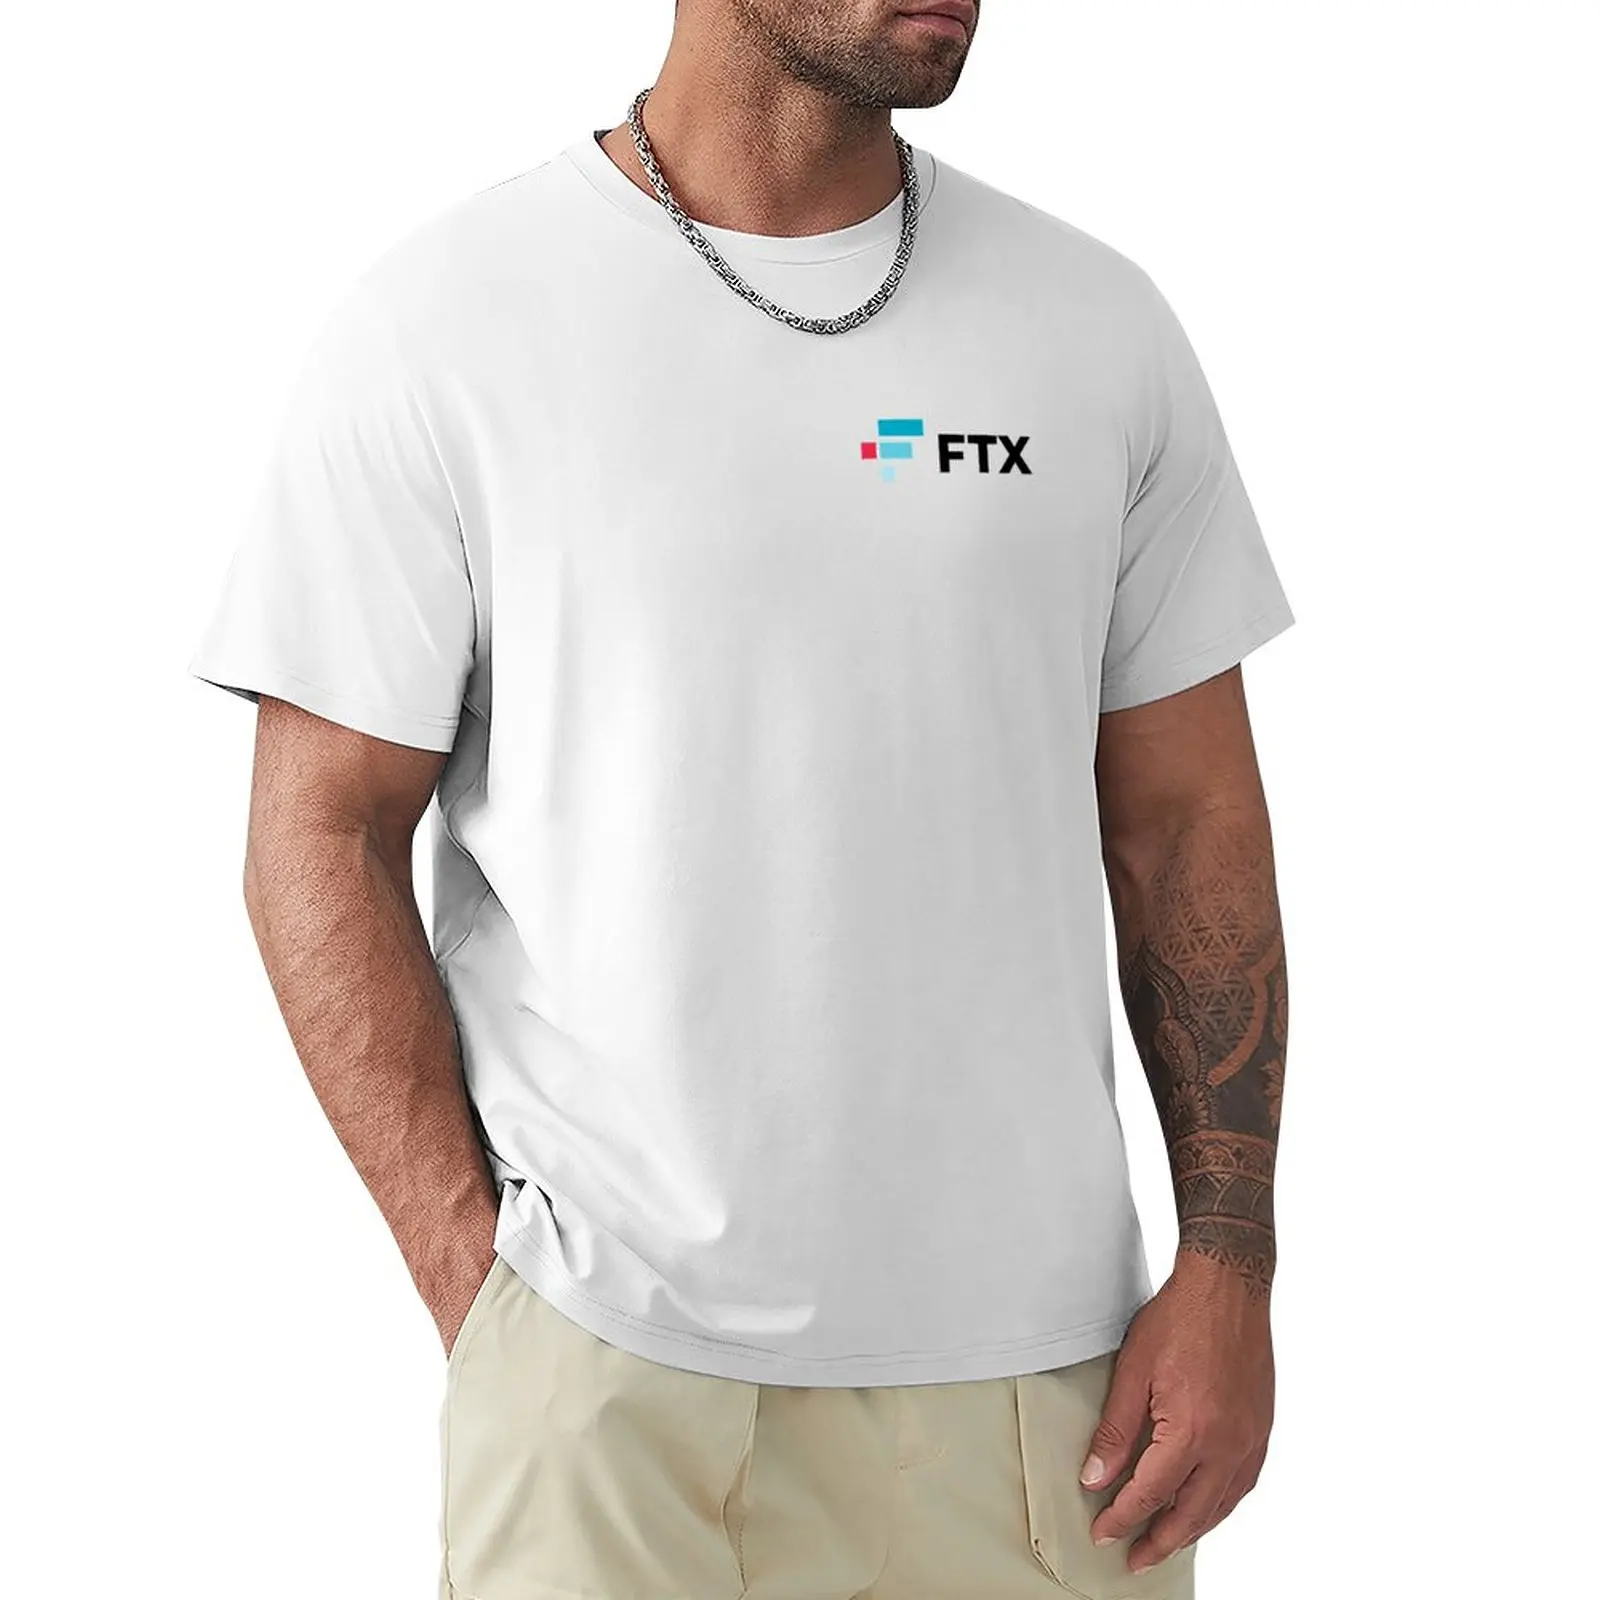 

What Is Ftx On Umpire - Ftx T-Shirt gift men gift women T-Shirt cute tops mens t shirt graphic